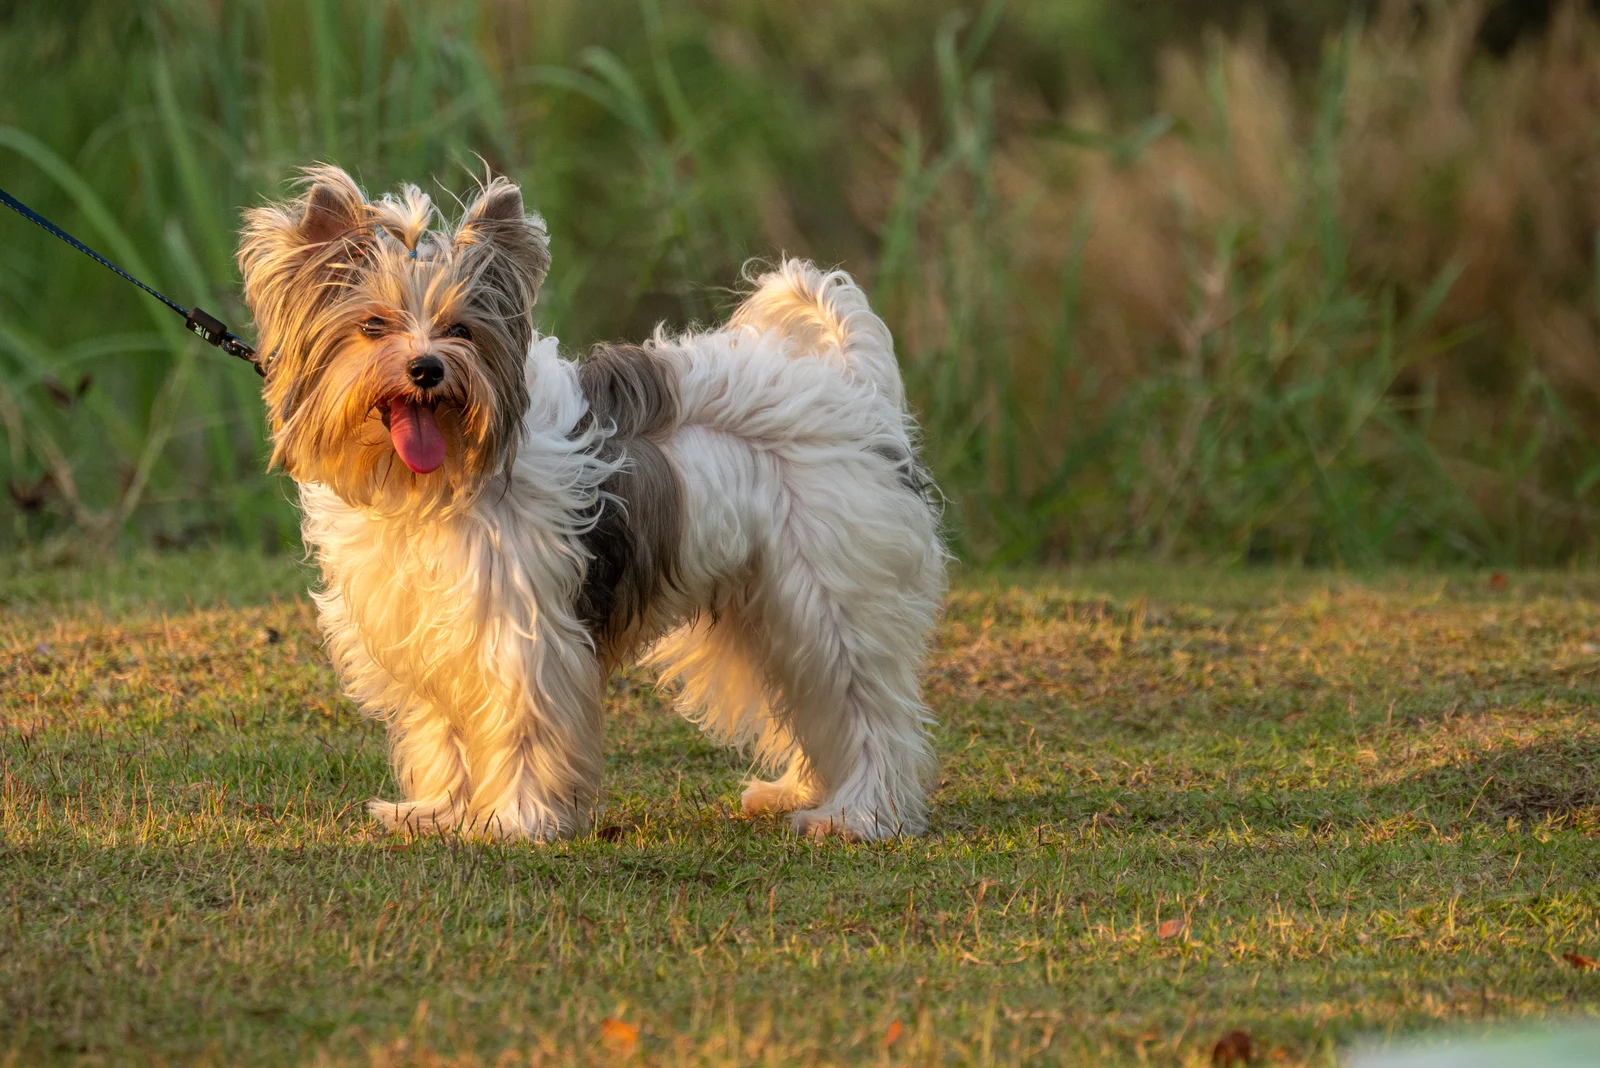 The Yorkshire Terrier stands on the grass